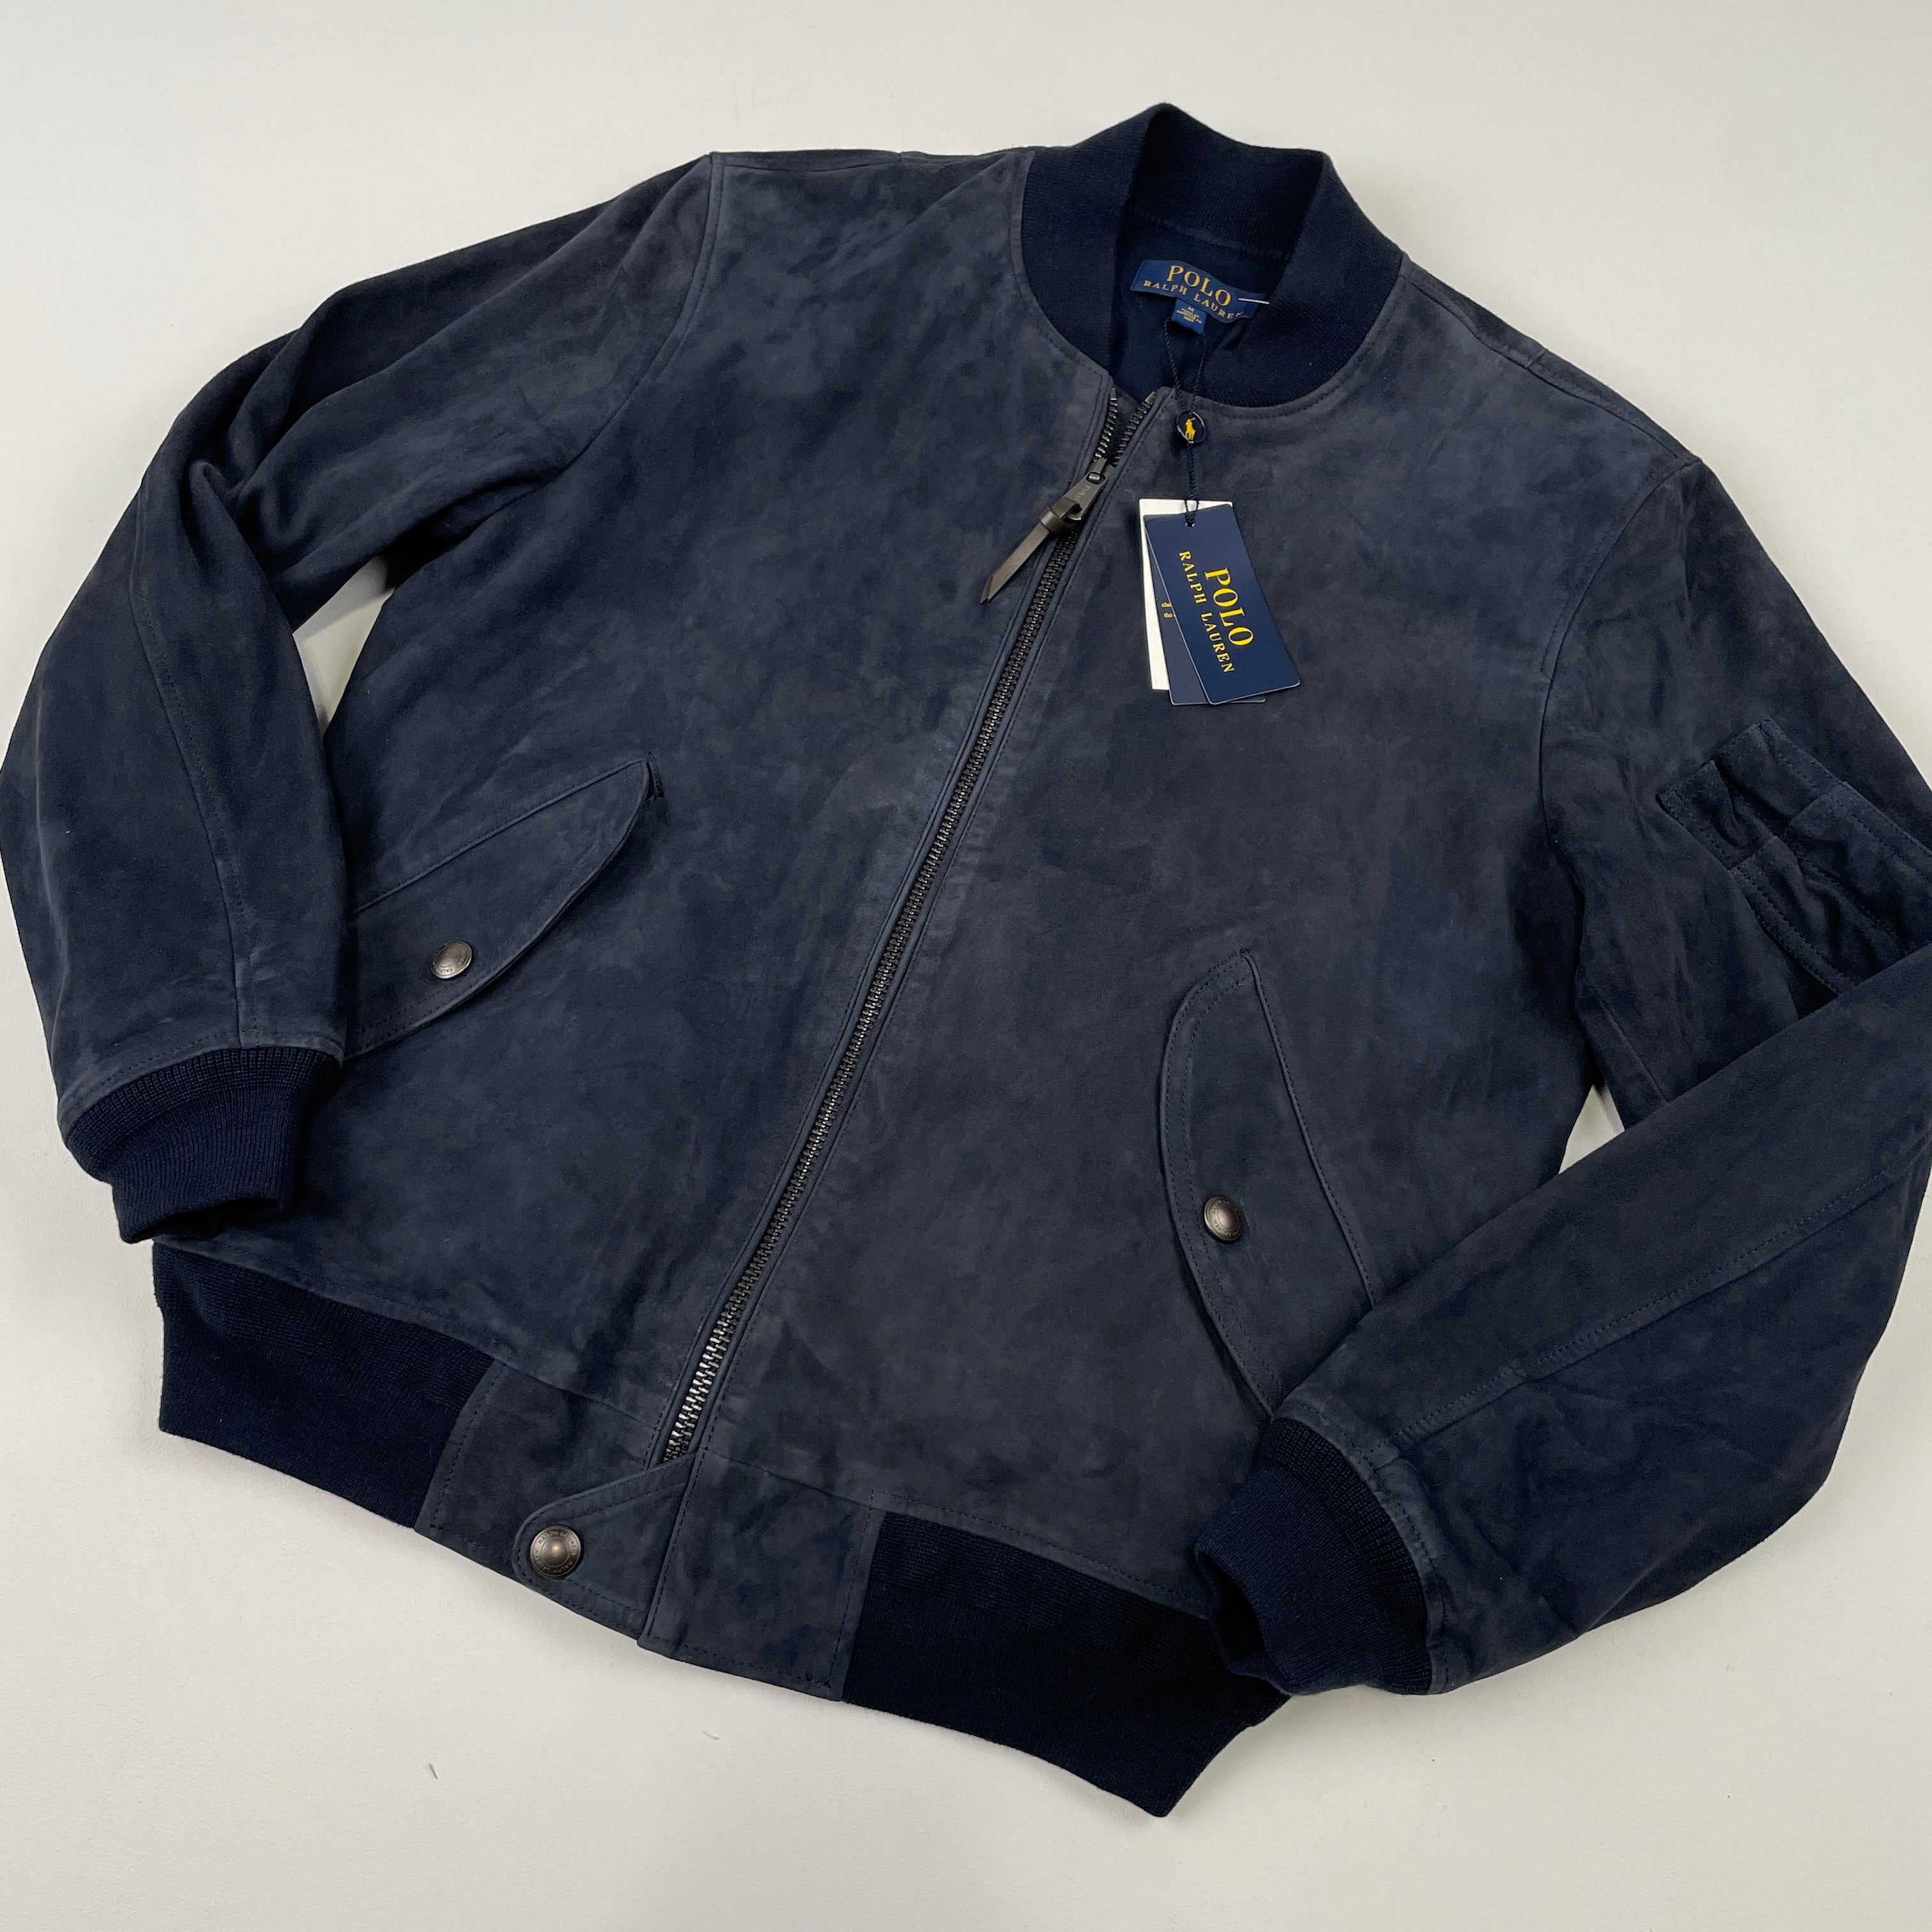 NWT Polo Ralph Lauren M Navy Blue Goat Suede Leather Bomber